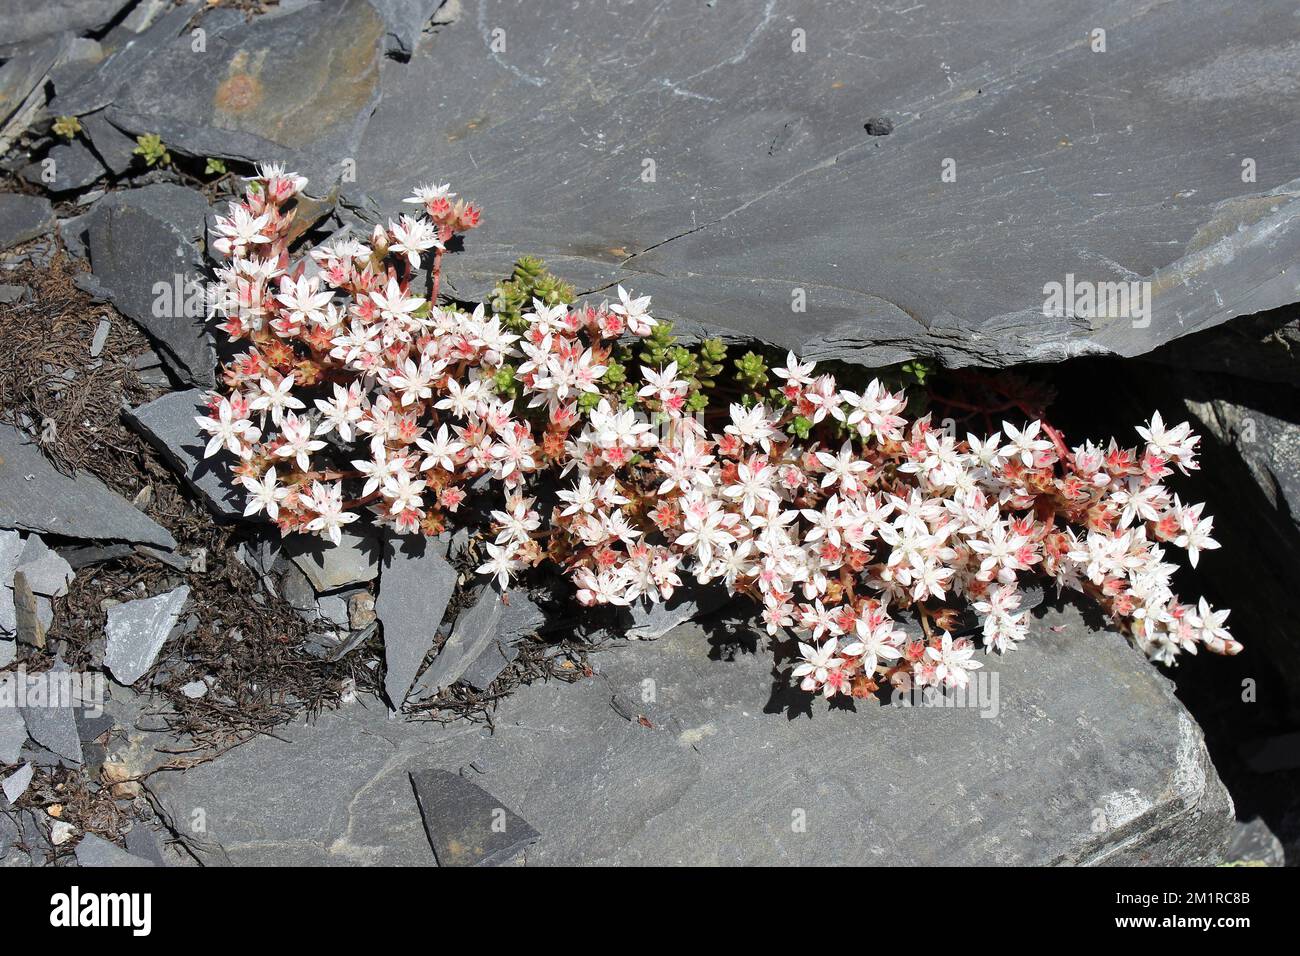 White Stonecrop Sedum album Growing Amongst Waste Slate From Former Cwmorthin Quarry, Wales Stock Photo